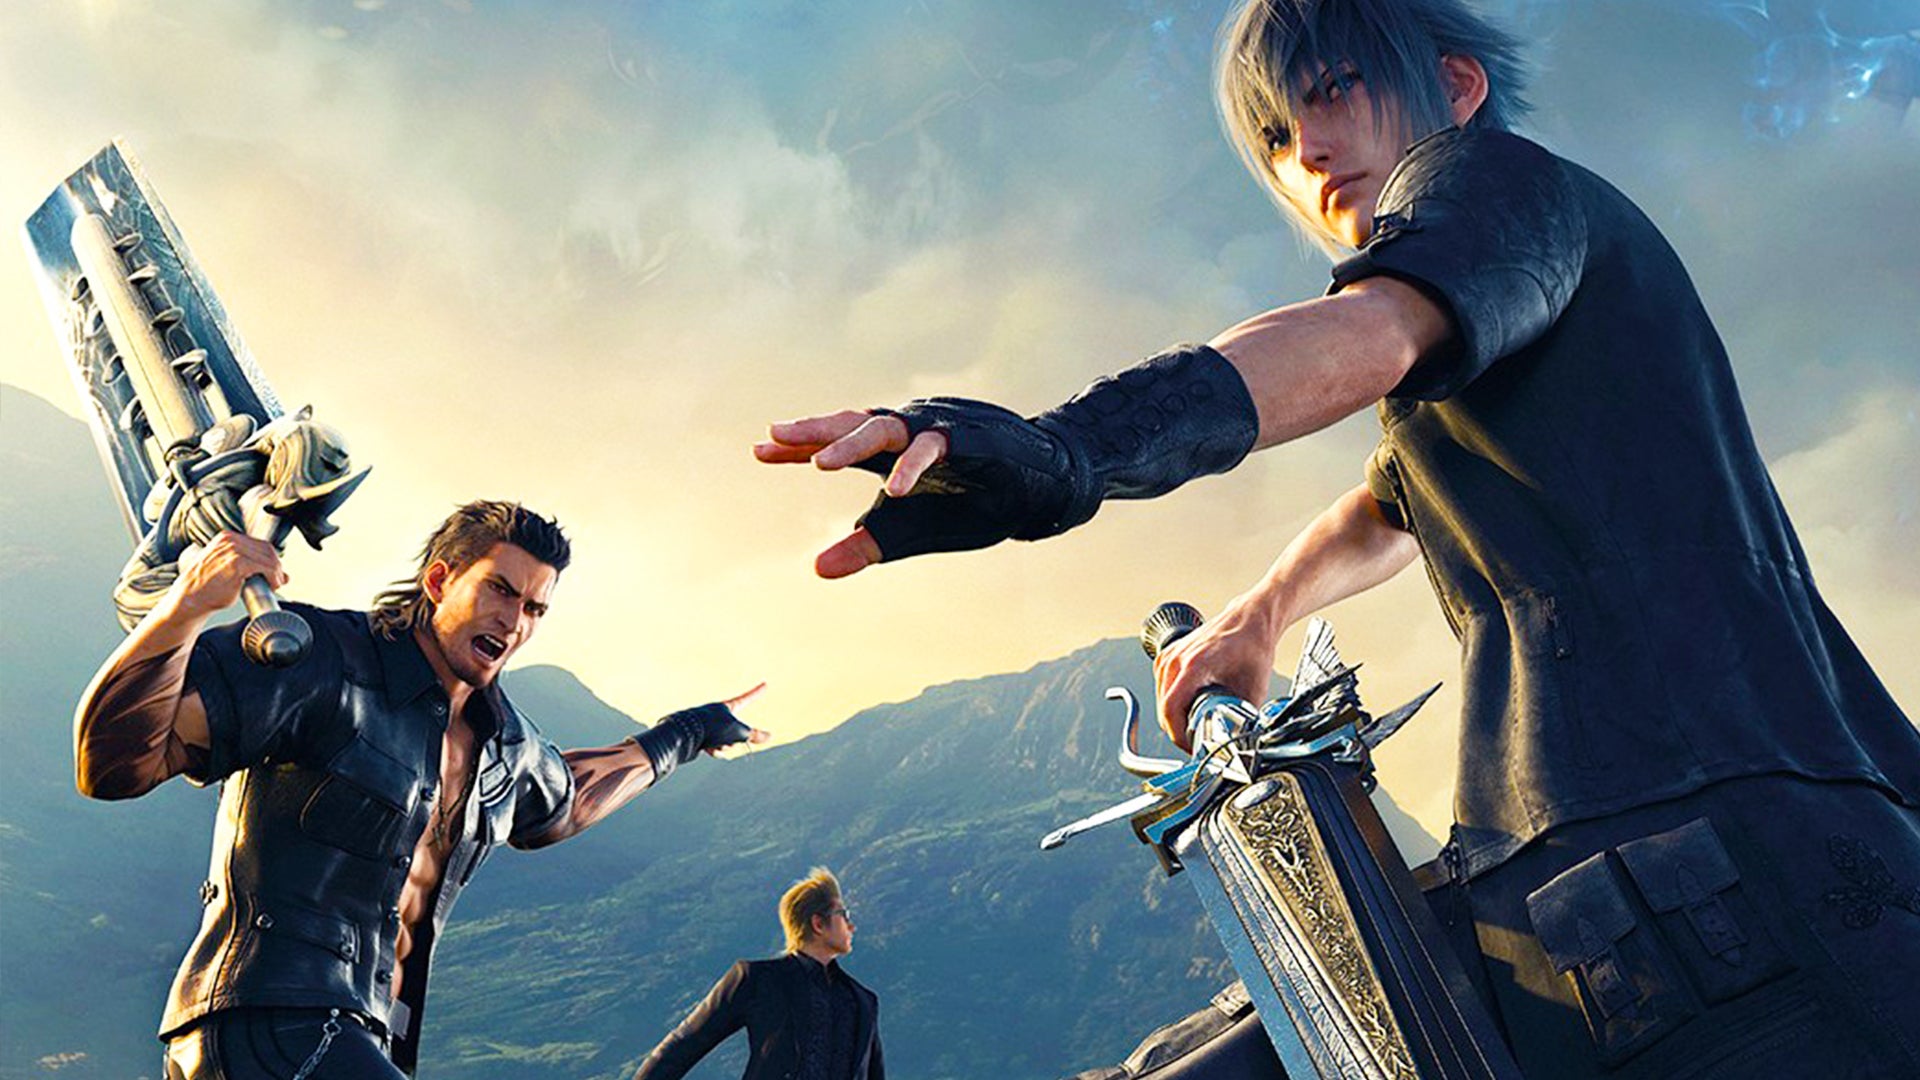 Image for Final Fantasy 15 on Stadia is a Technical Disappointment - Stadia vs Xbox One X Comparison